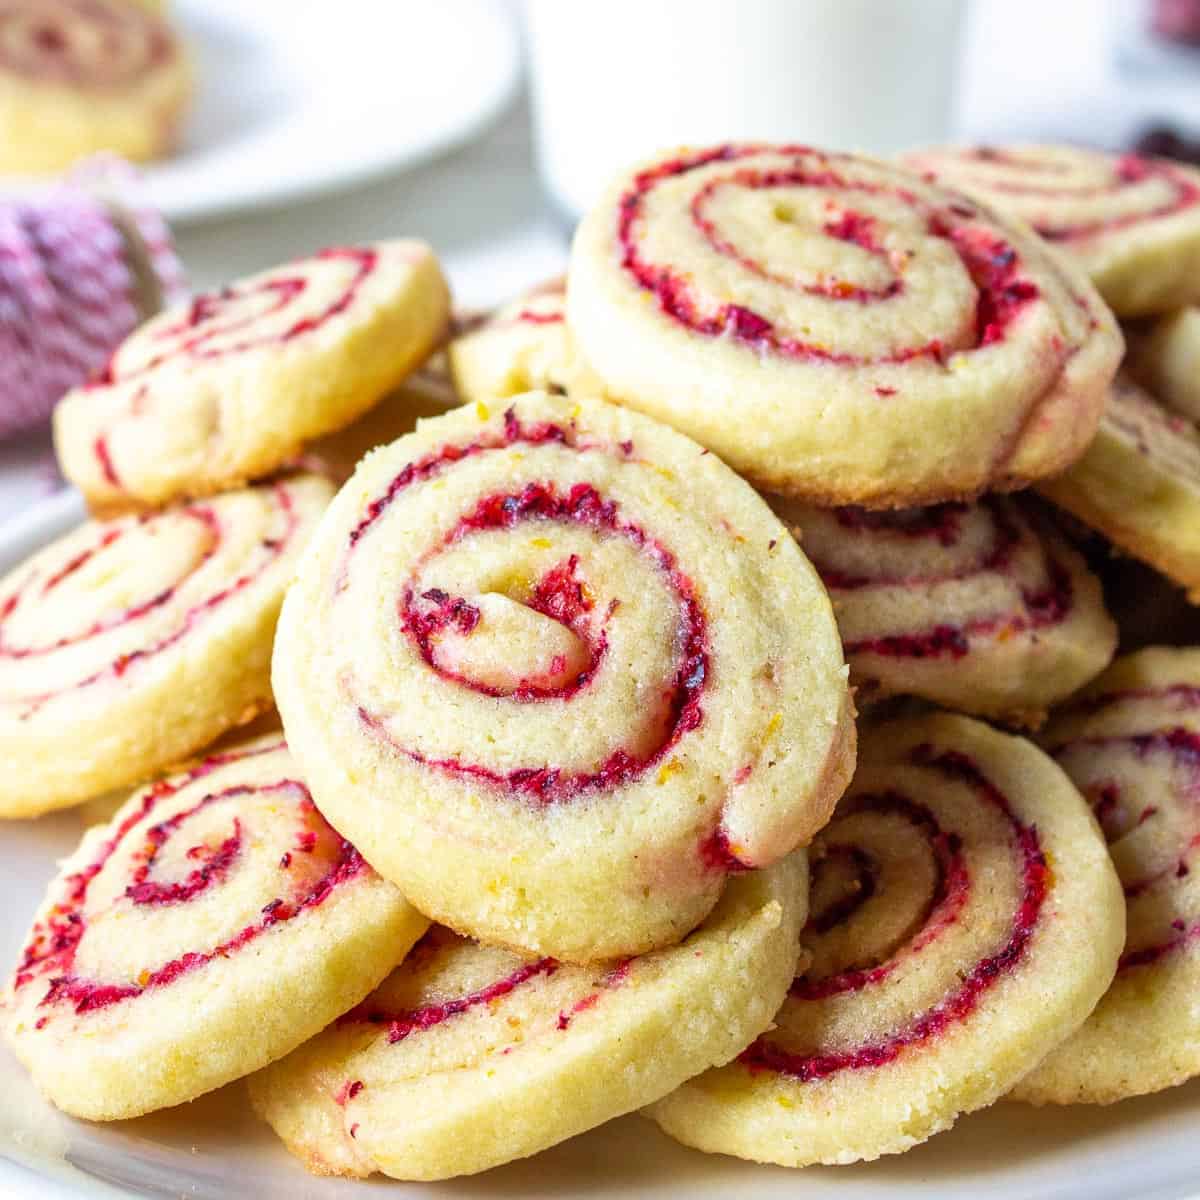 Cranberry pinwheel cookies piled on a plate.